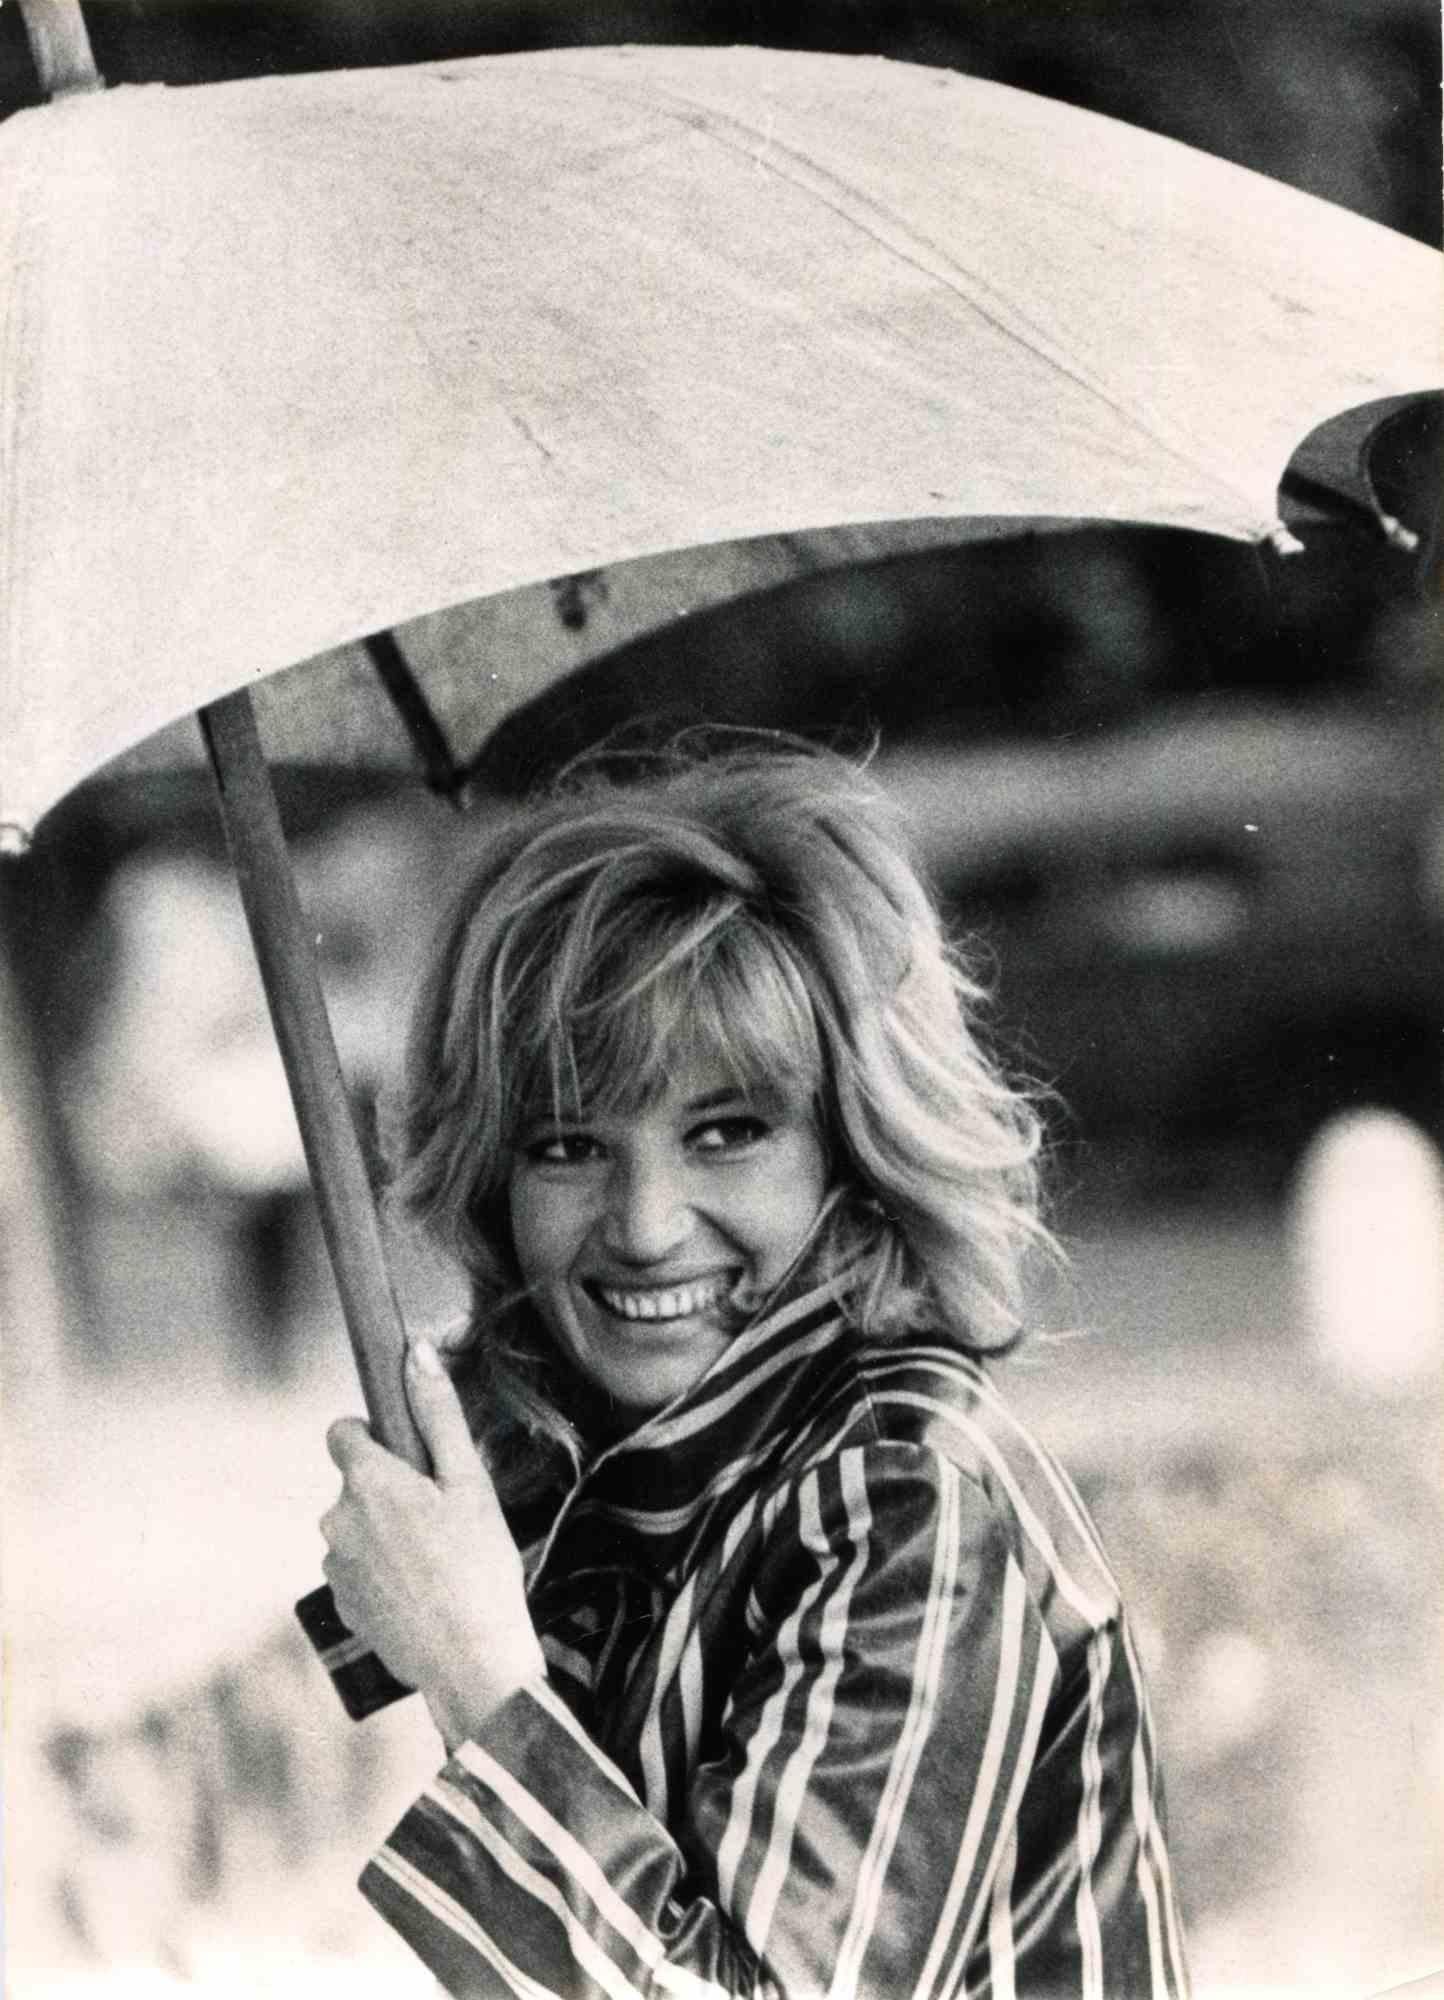 Portrait of Monica Vitti is a vintage b/w photograph realized by Agenzia ANSA in 1970s. Guter Zustand.

Monica Vitti is born in Rome on November 3, 1931. Admitted in 1950 to the Academy of Dramatic Art (where she will return in 1986 as a teacher),